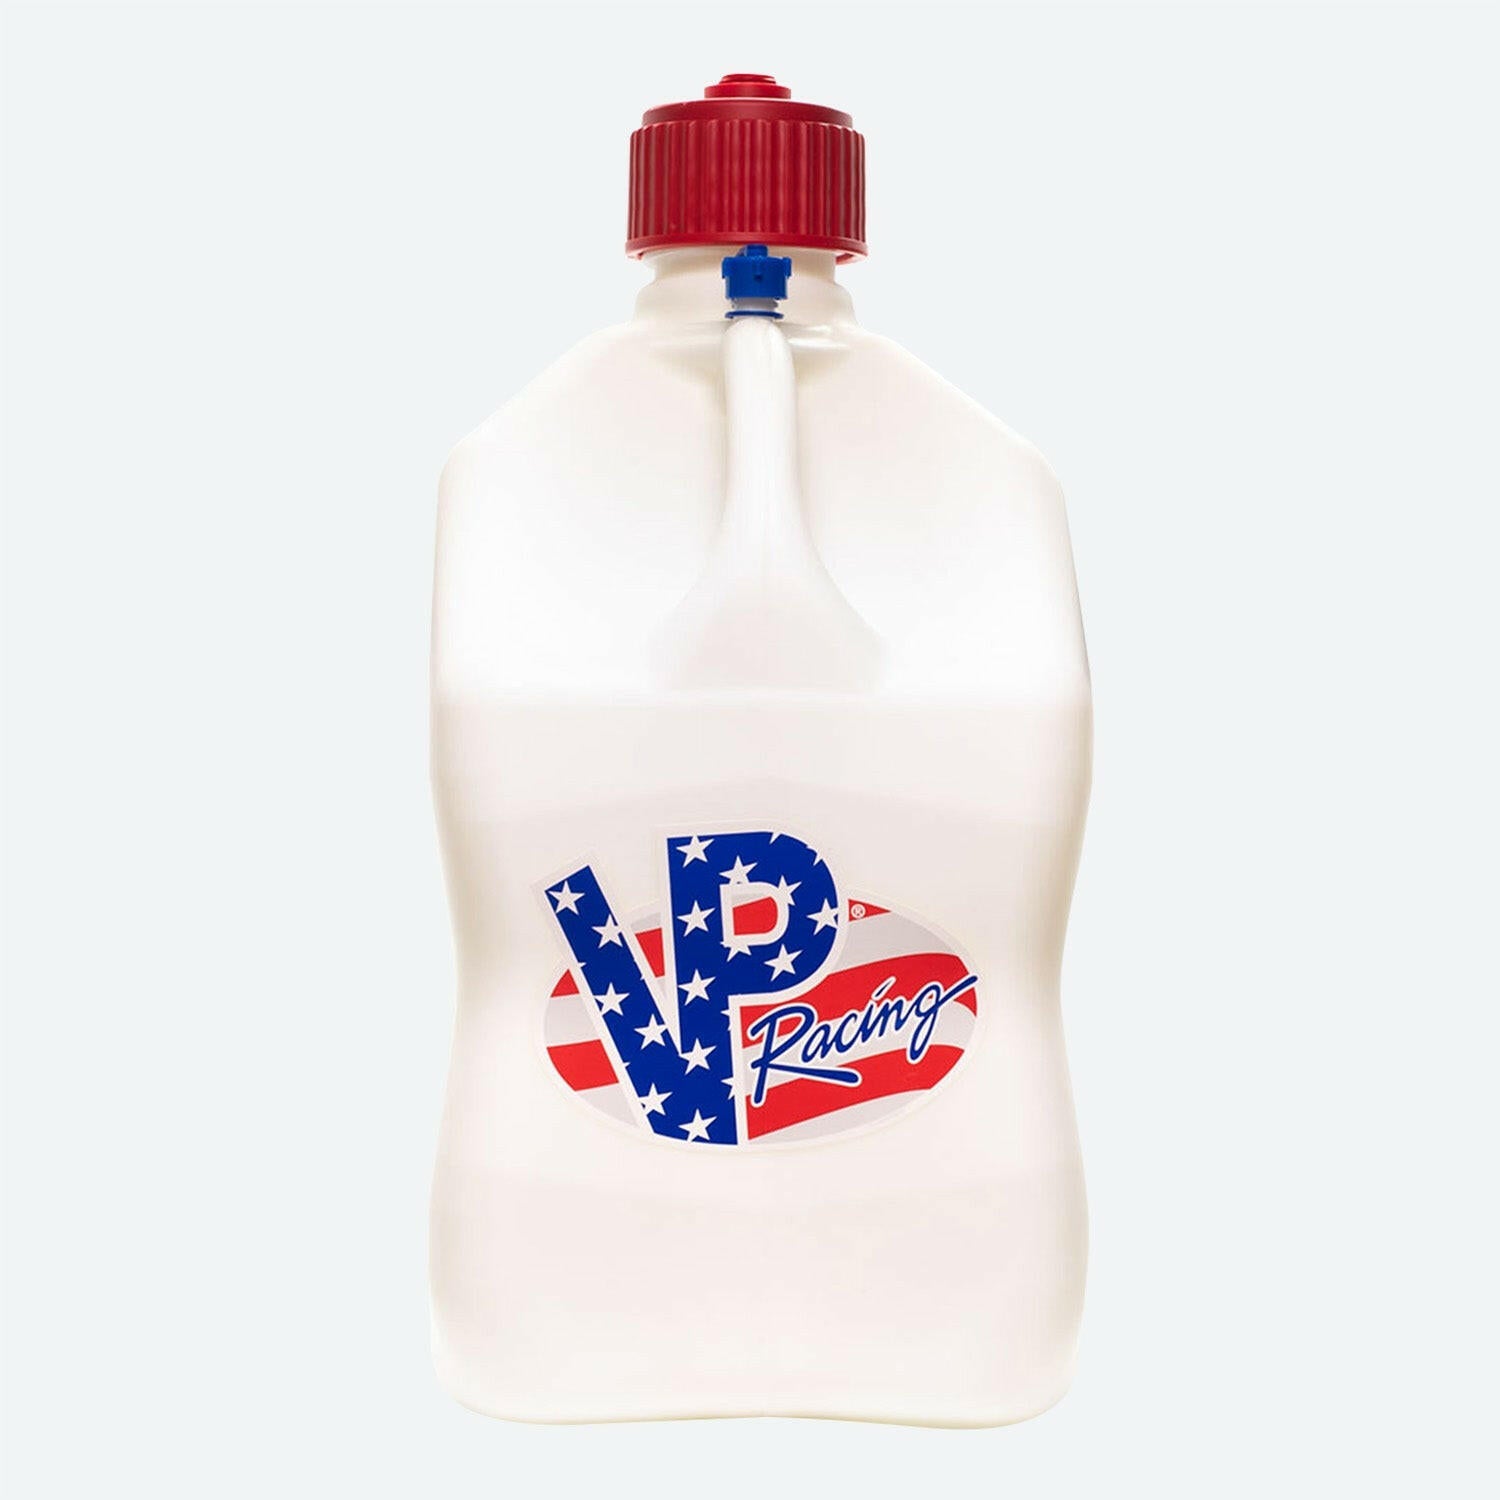 A 5.5-Gallon Motorsport Container® - Square. The utility jug has a red screw cap. It&#39;s decorated with the letters VP Racing logo in a blue and white patriotic stars pattern on a red and white striped background.